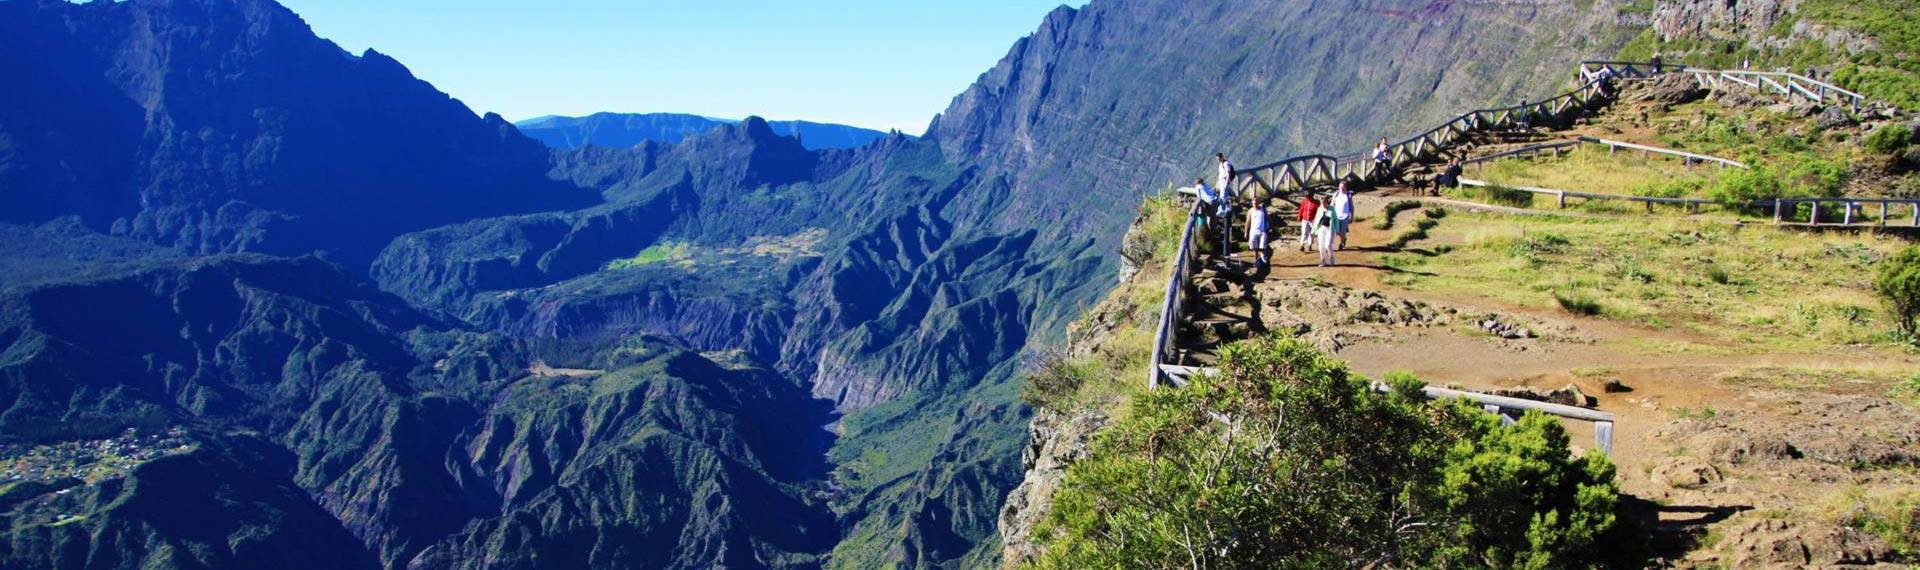 Reunion Island, Outdoor Openspaces